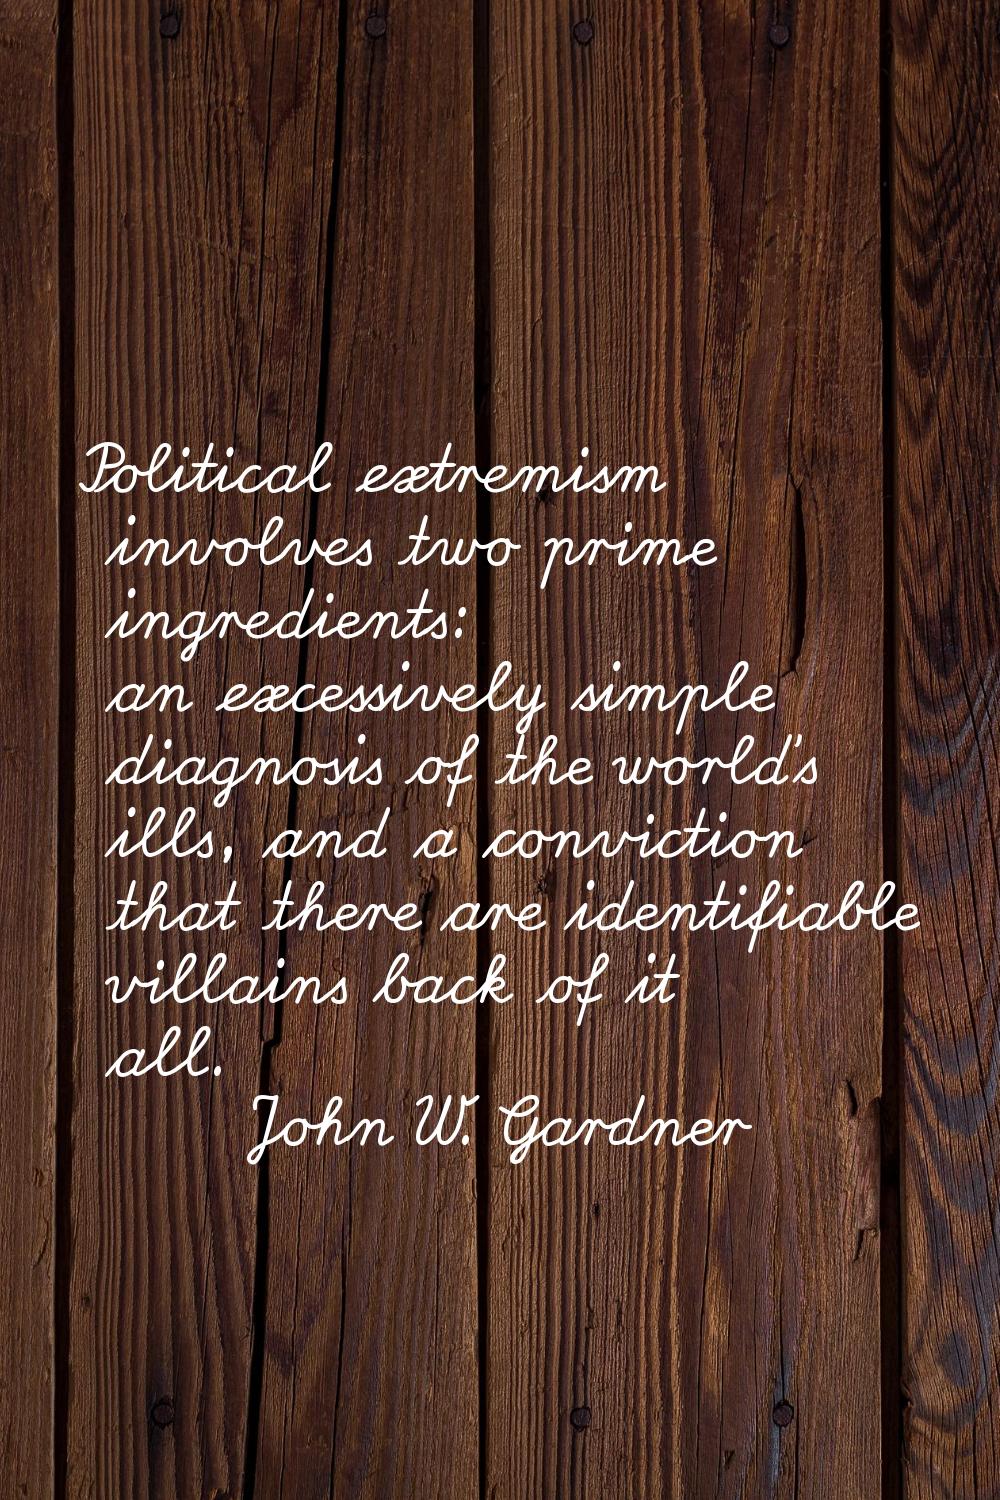 Political extremism involves two prime ingredients: an excessively simple diagnosis of the world's 